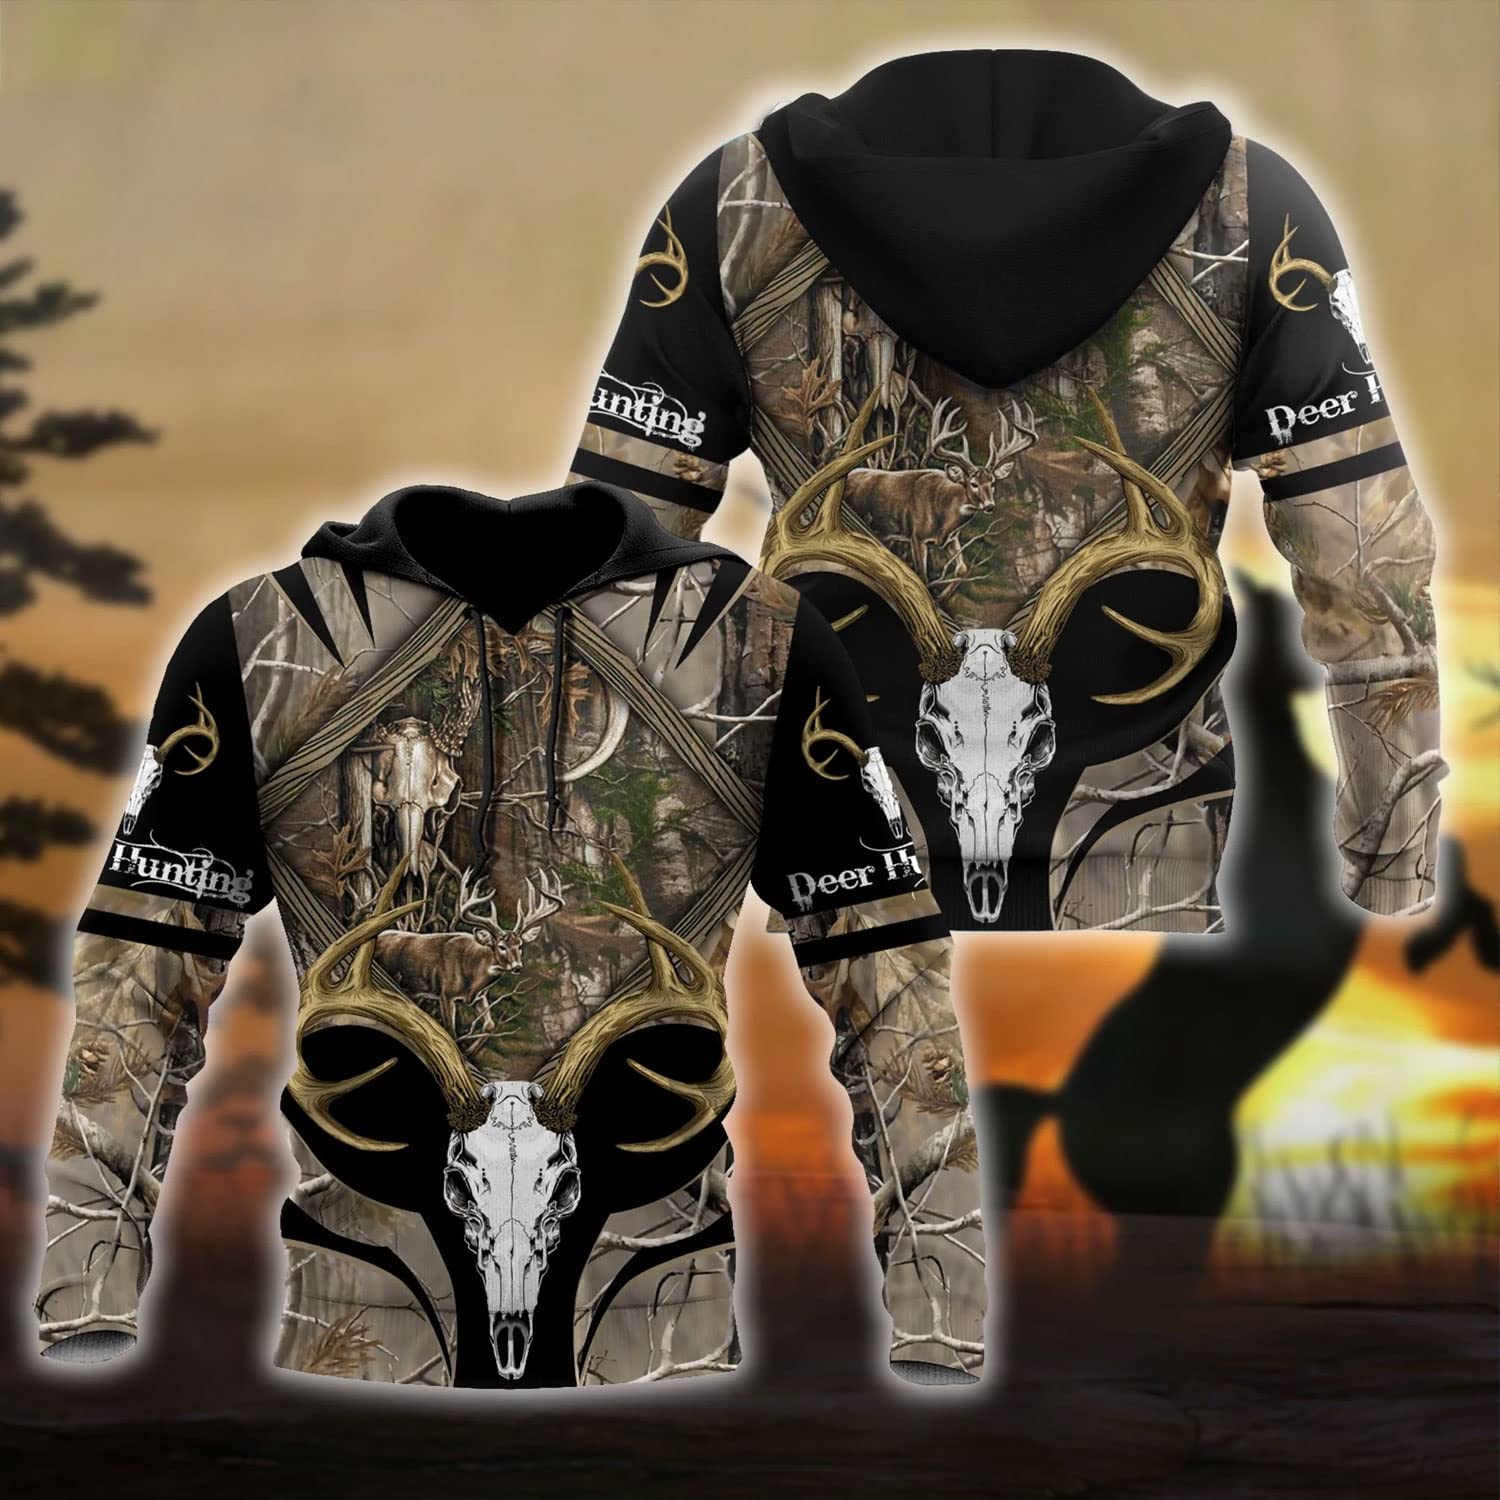 Get the Ultimate 3D Full Print Deer Hunting Experience with this Cool Animal Hunting Shirt – Perfect for Deer Hunter Lovers and as a Gift for Family – JOT1538